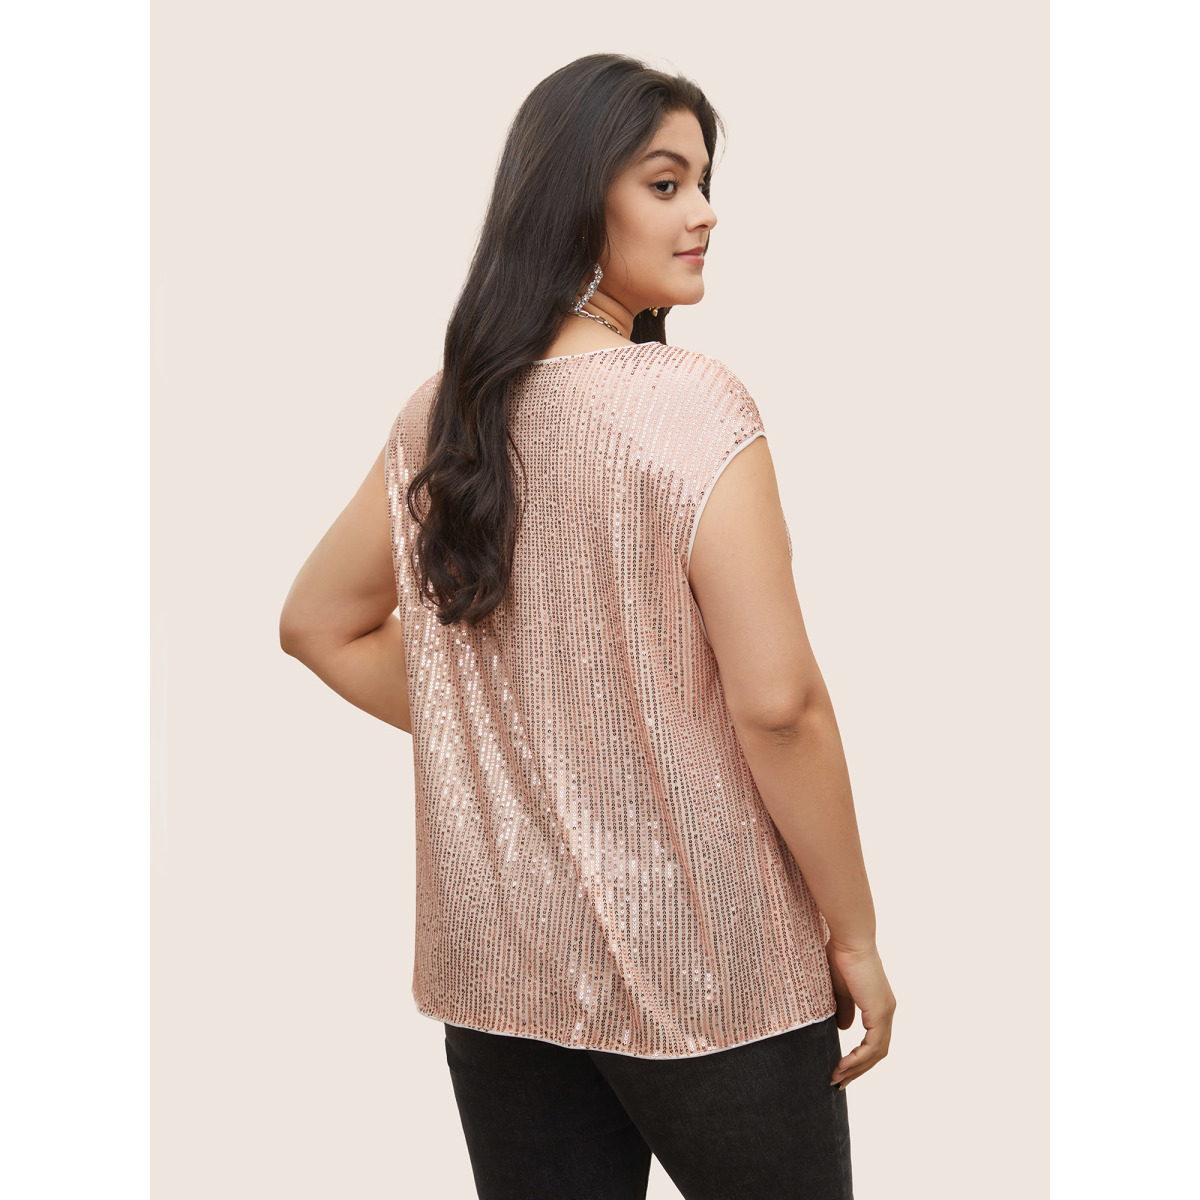 

Plus Size Champagne Solid Sequin Cowl Neck Sleeveless Blouse Women Cocktail Sleeveless Cowl Neck Party Blouses BloomChic